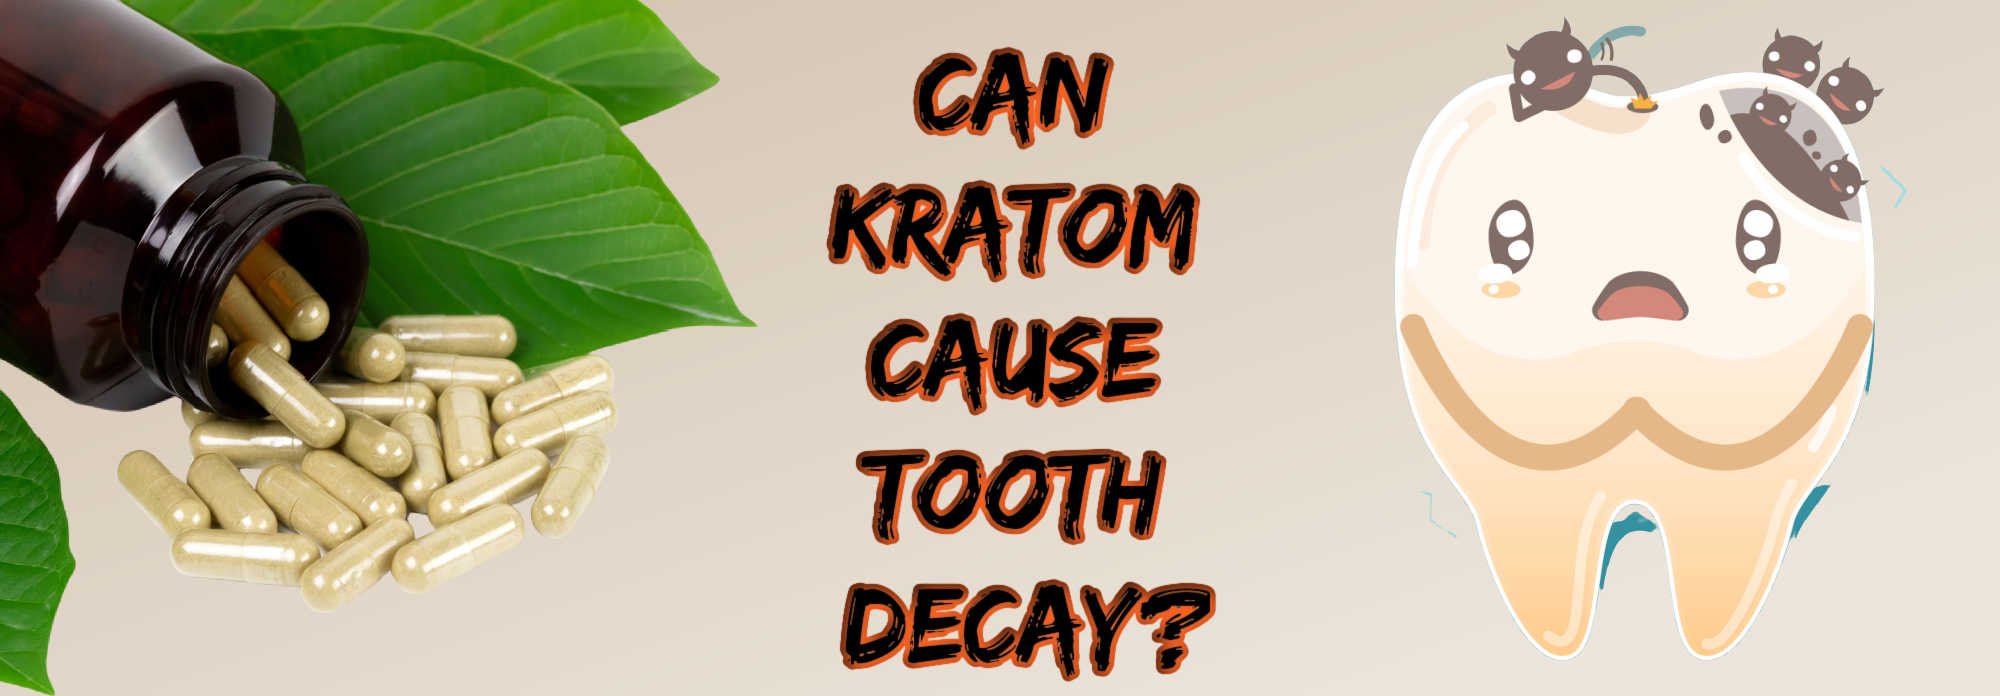 image of can kratom cause tooth decay